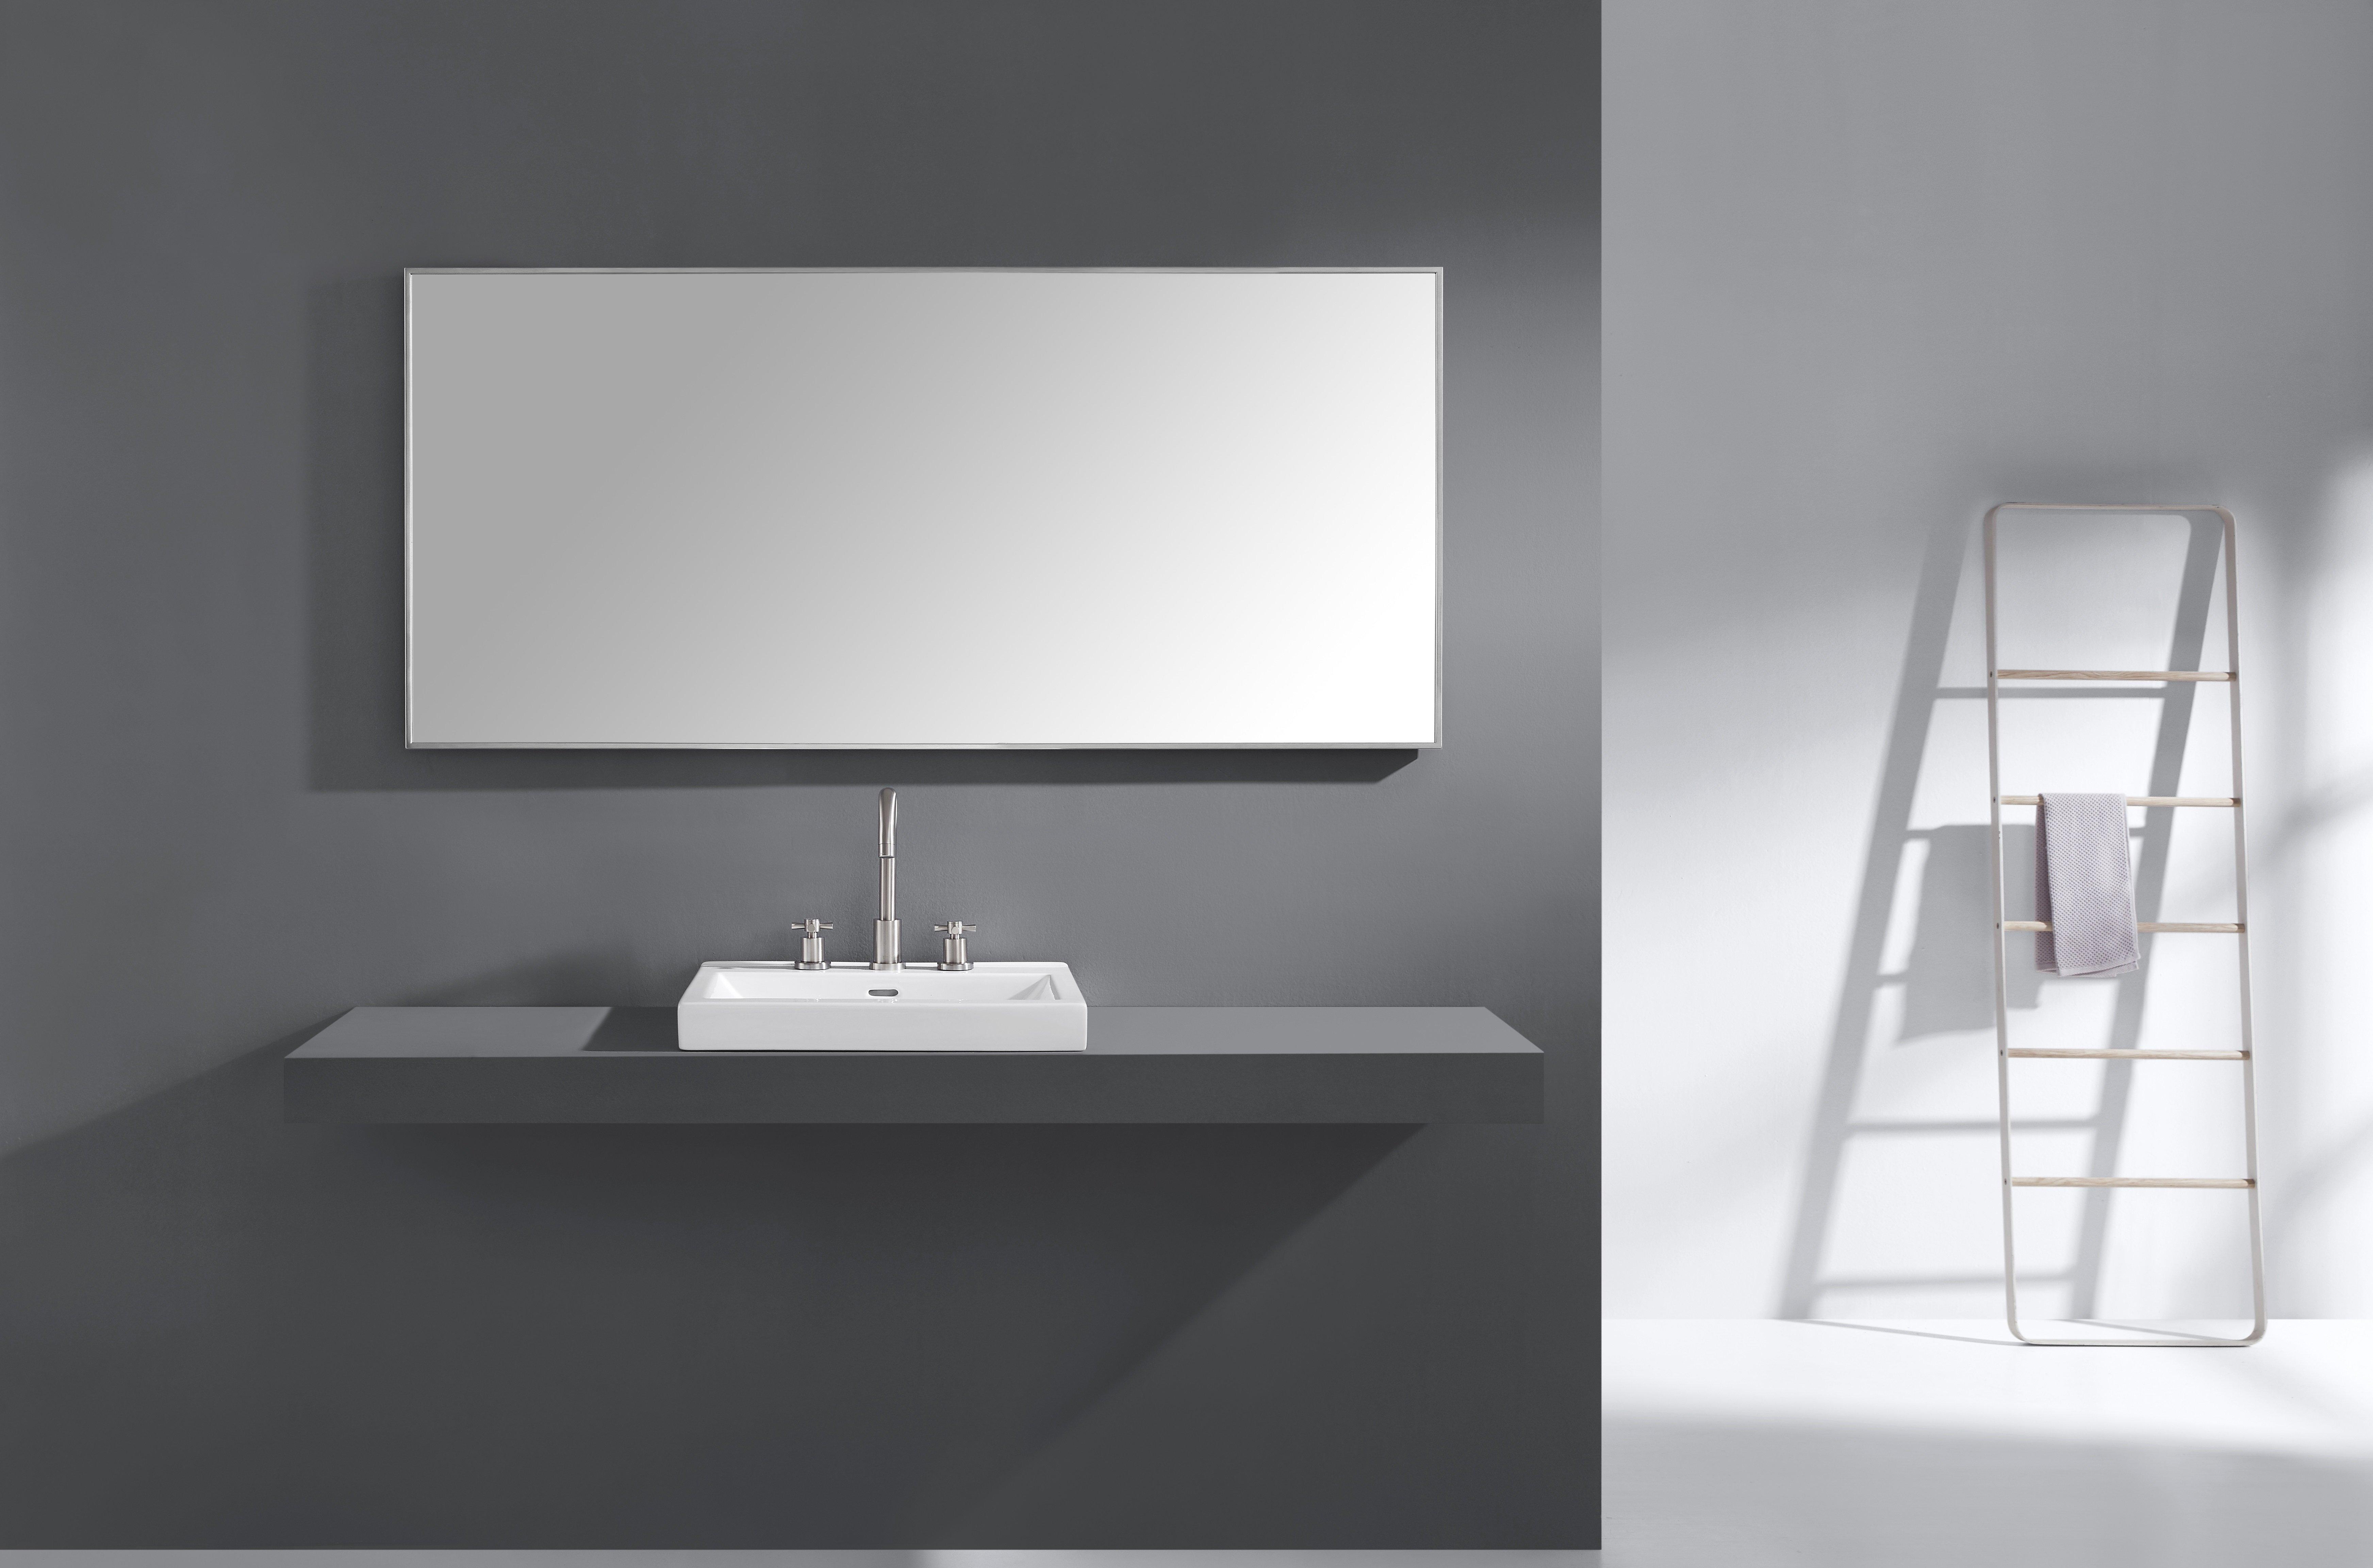 Sonia 59 in. Brushed Stainless Steel Mirror